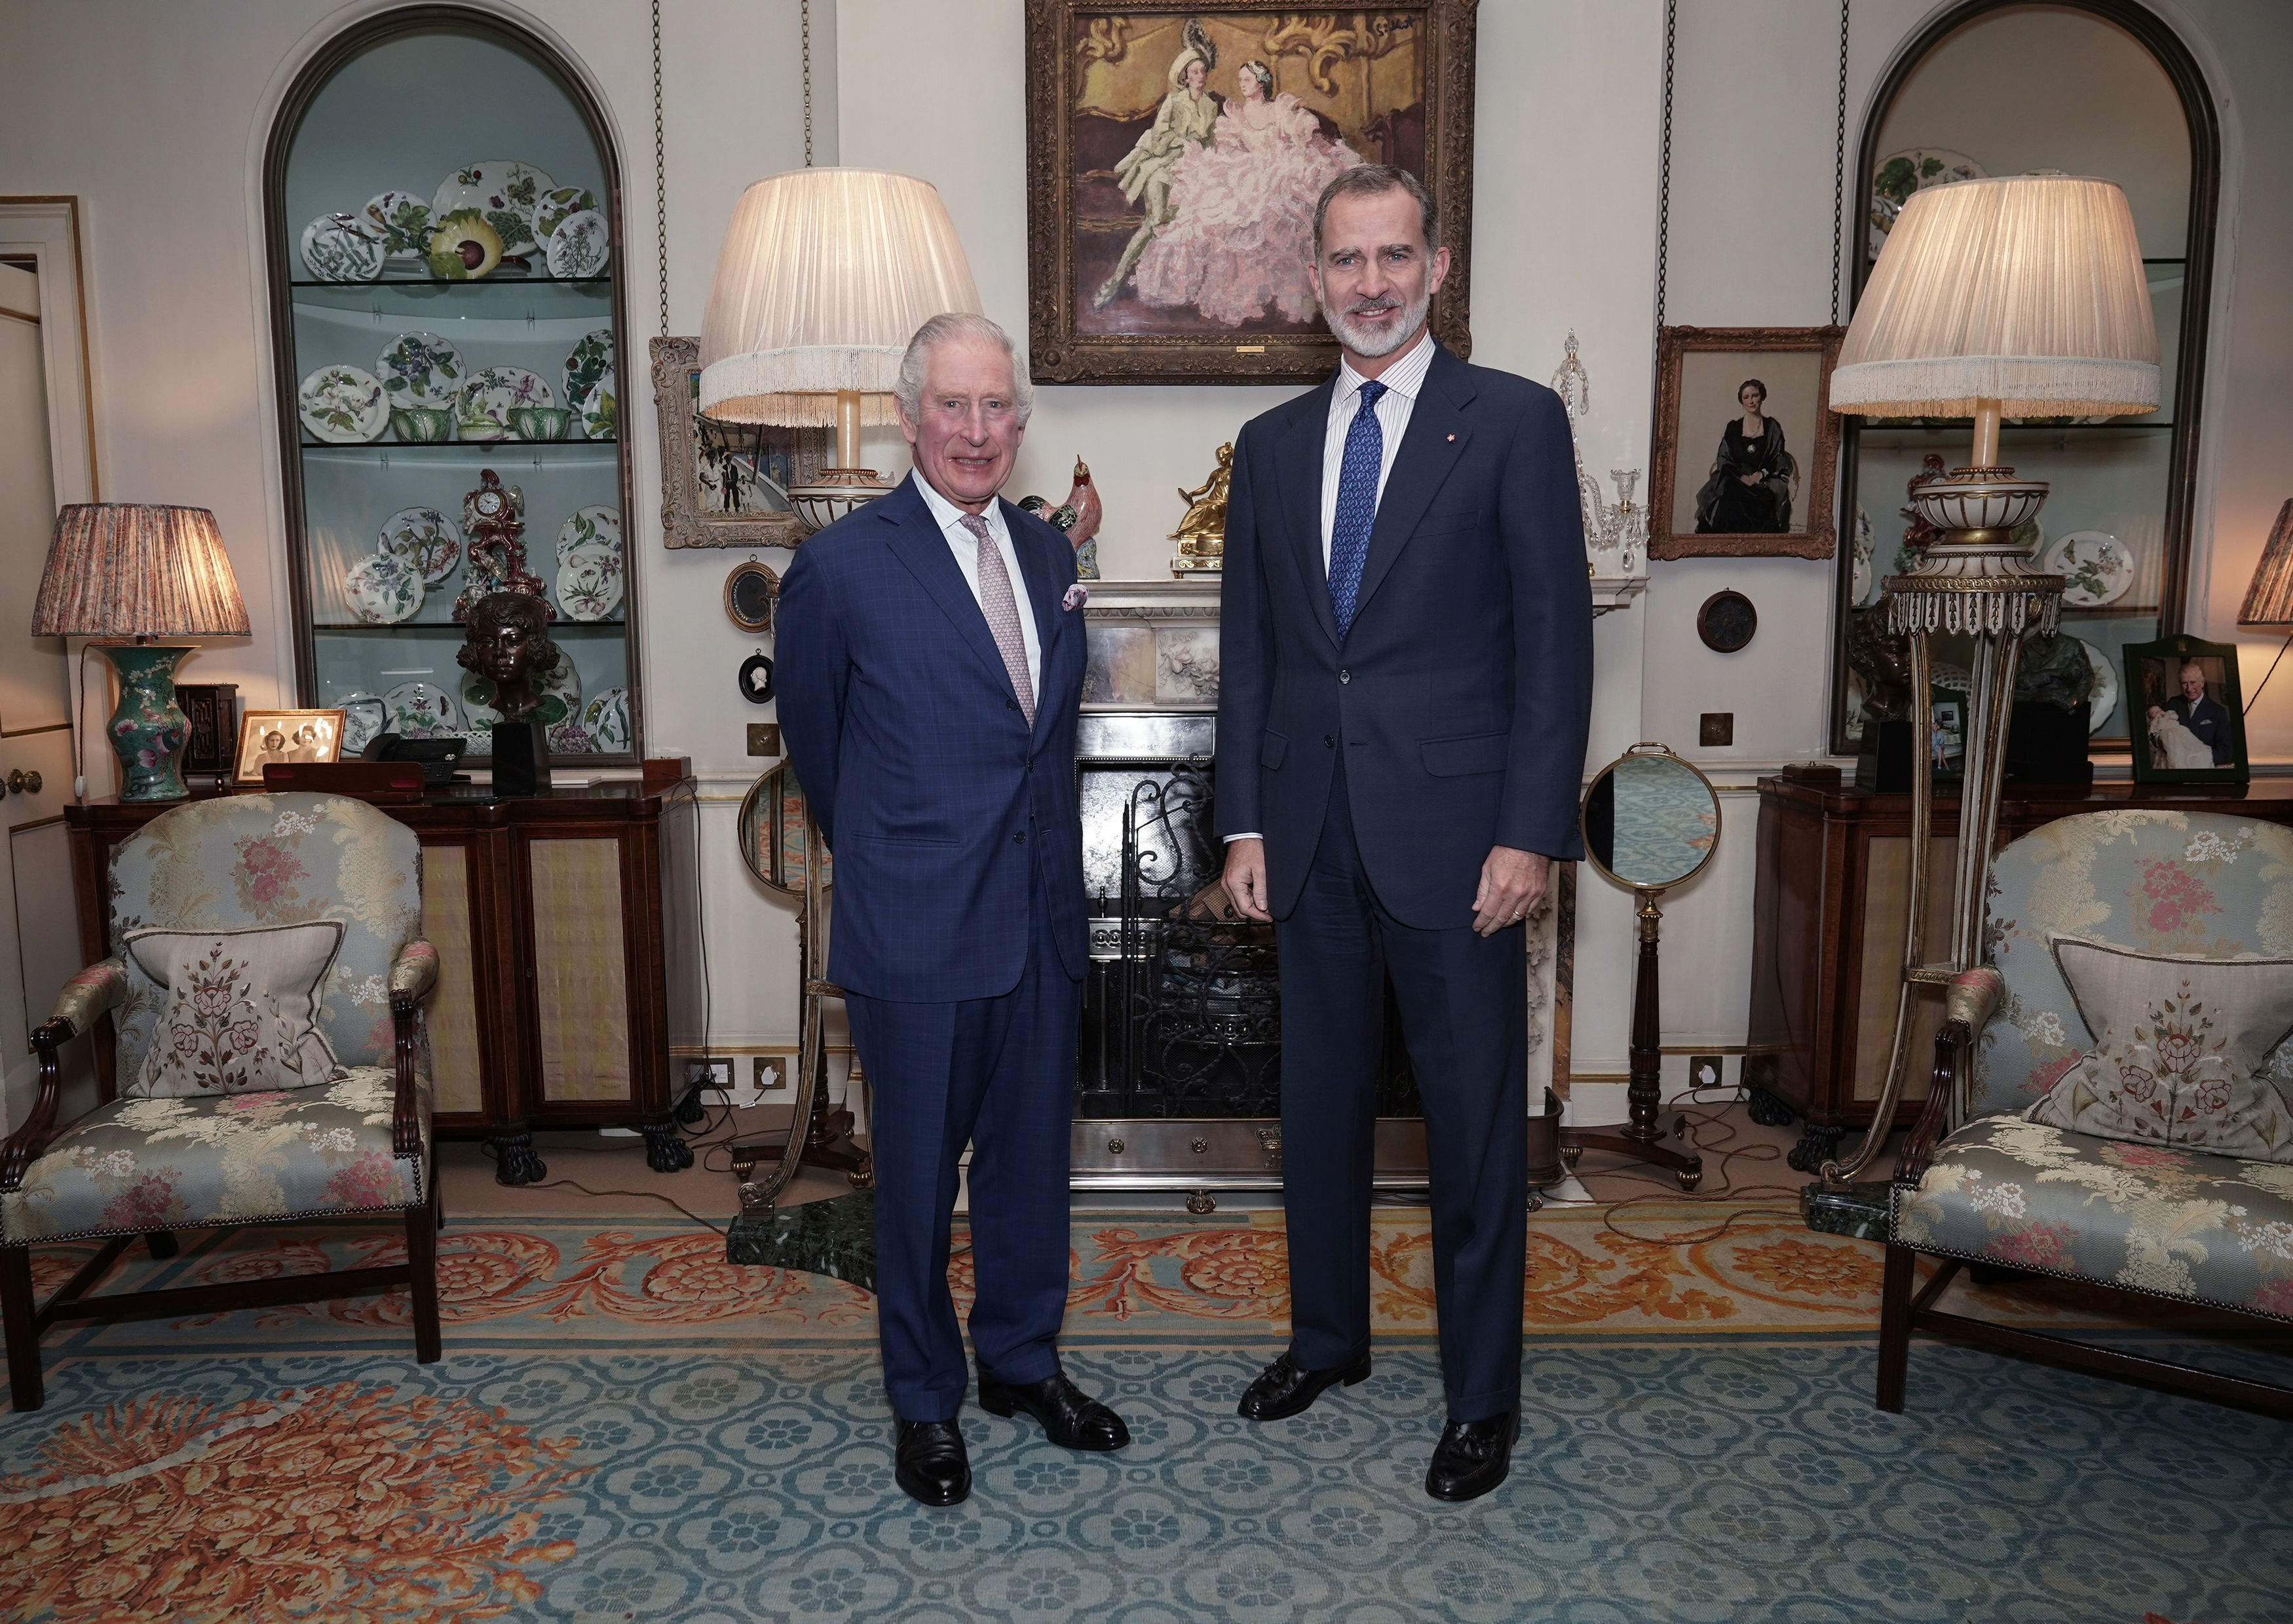 <p>King Charles III received King Felipe VI of Spain -- a distant cousin, as both are descendants of britain's Queen Victoria -- in the Morning Room during an audience at Clarence House in London on Nov. 21, 2022.</p>